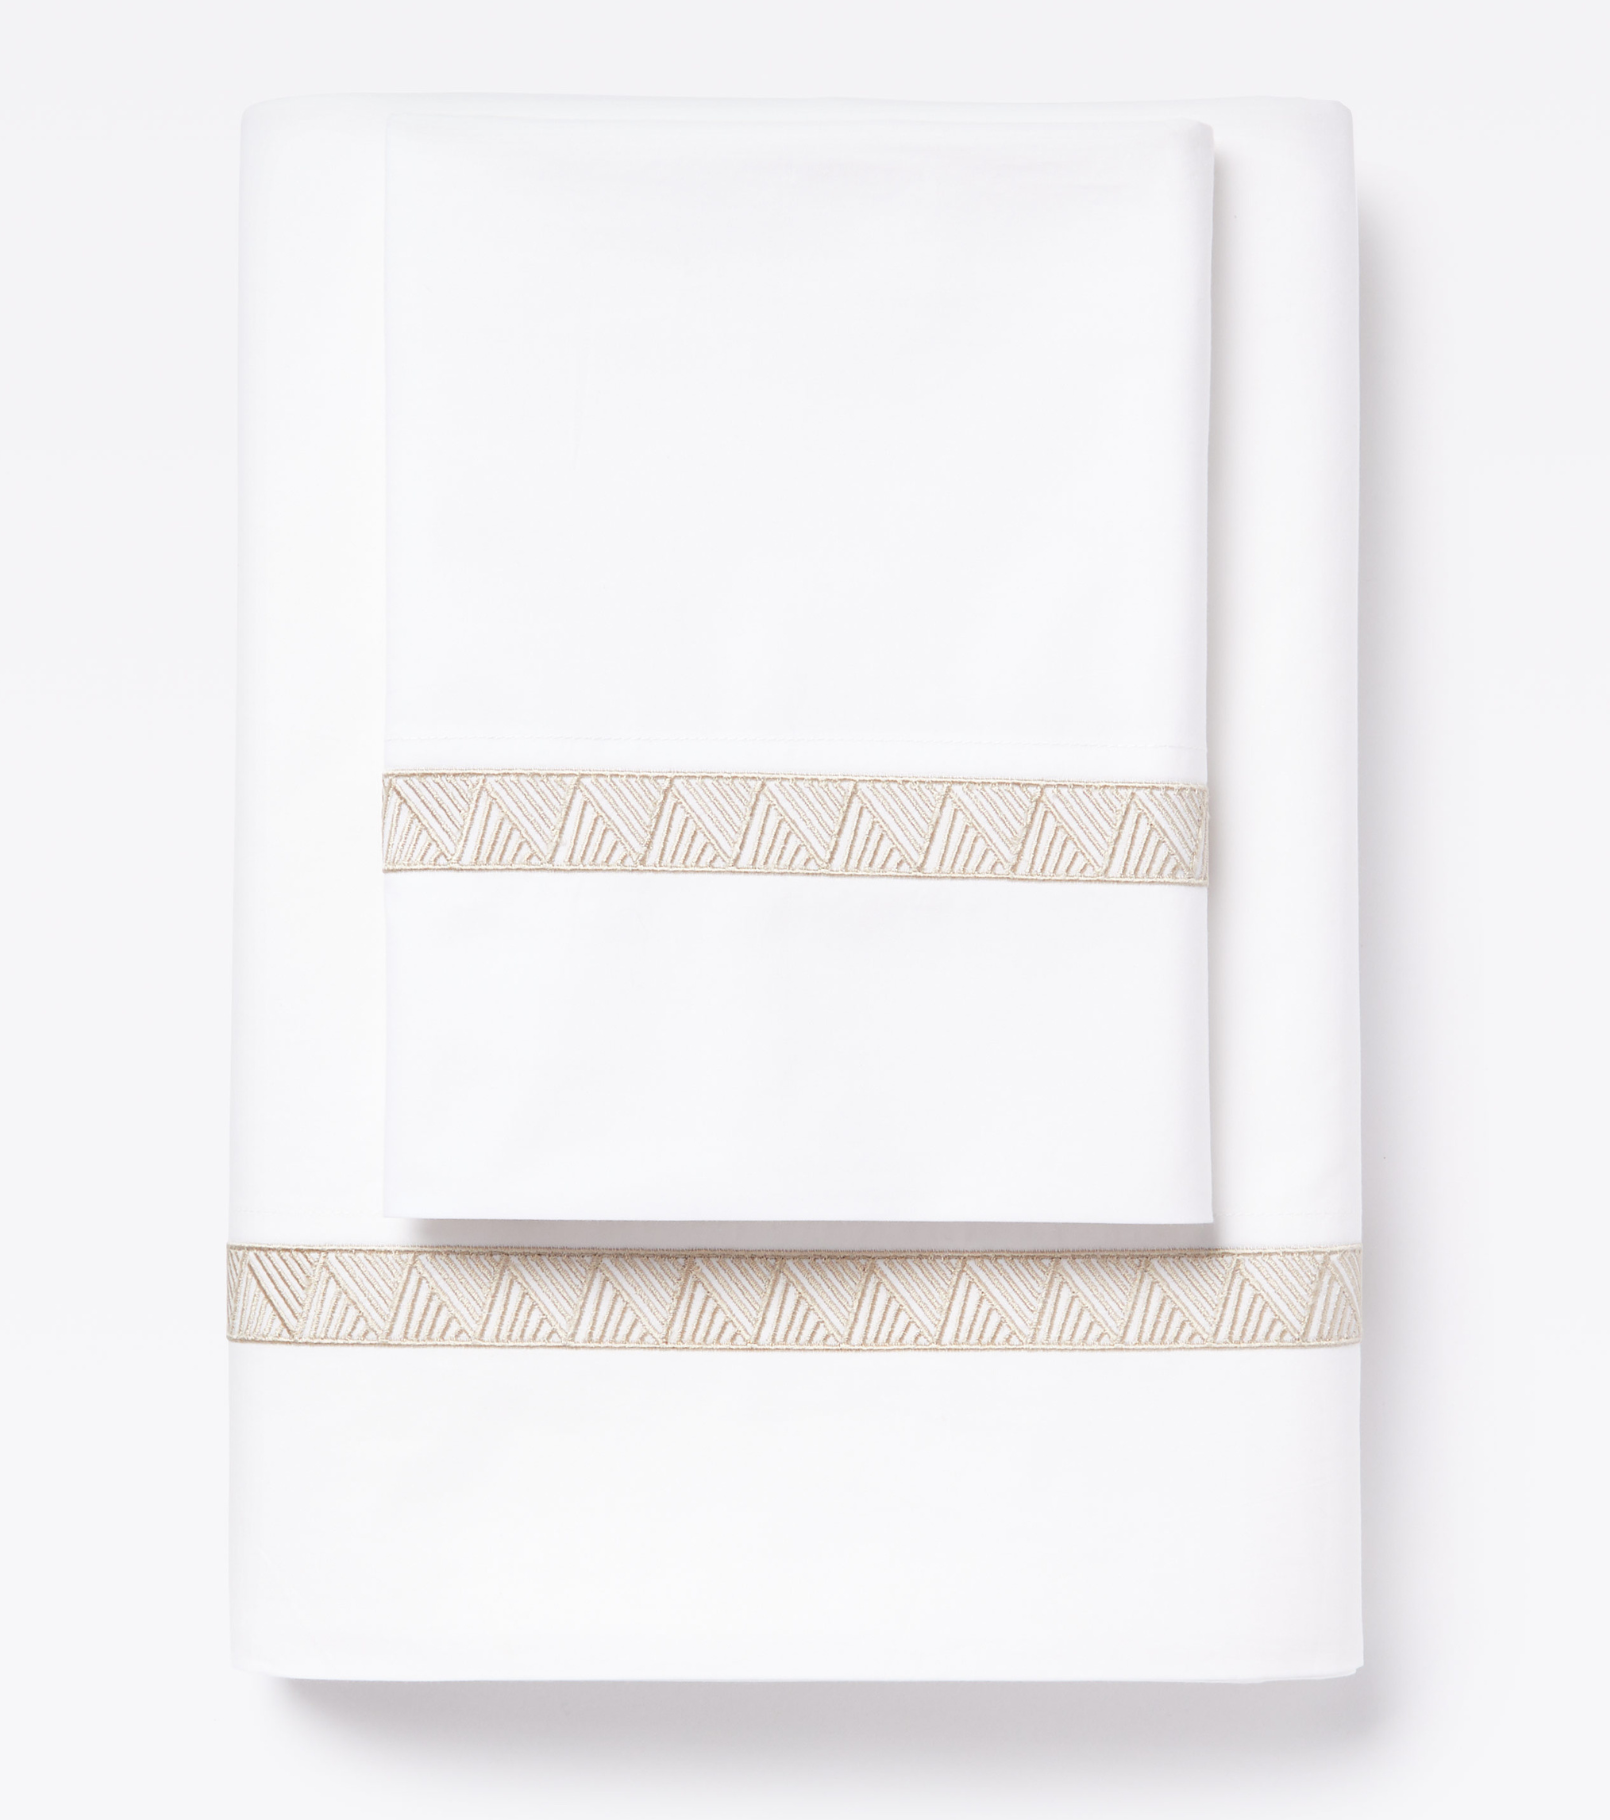 Averylily Weave Sheet Set in White with embroidered trim in Sand. 510-thread count pure cotton percale.